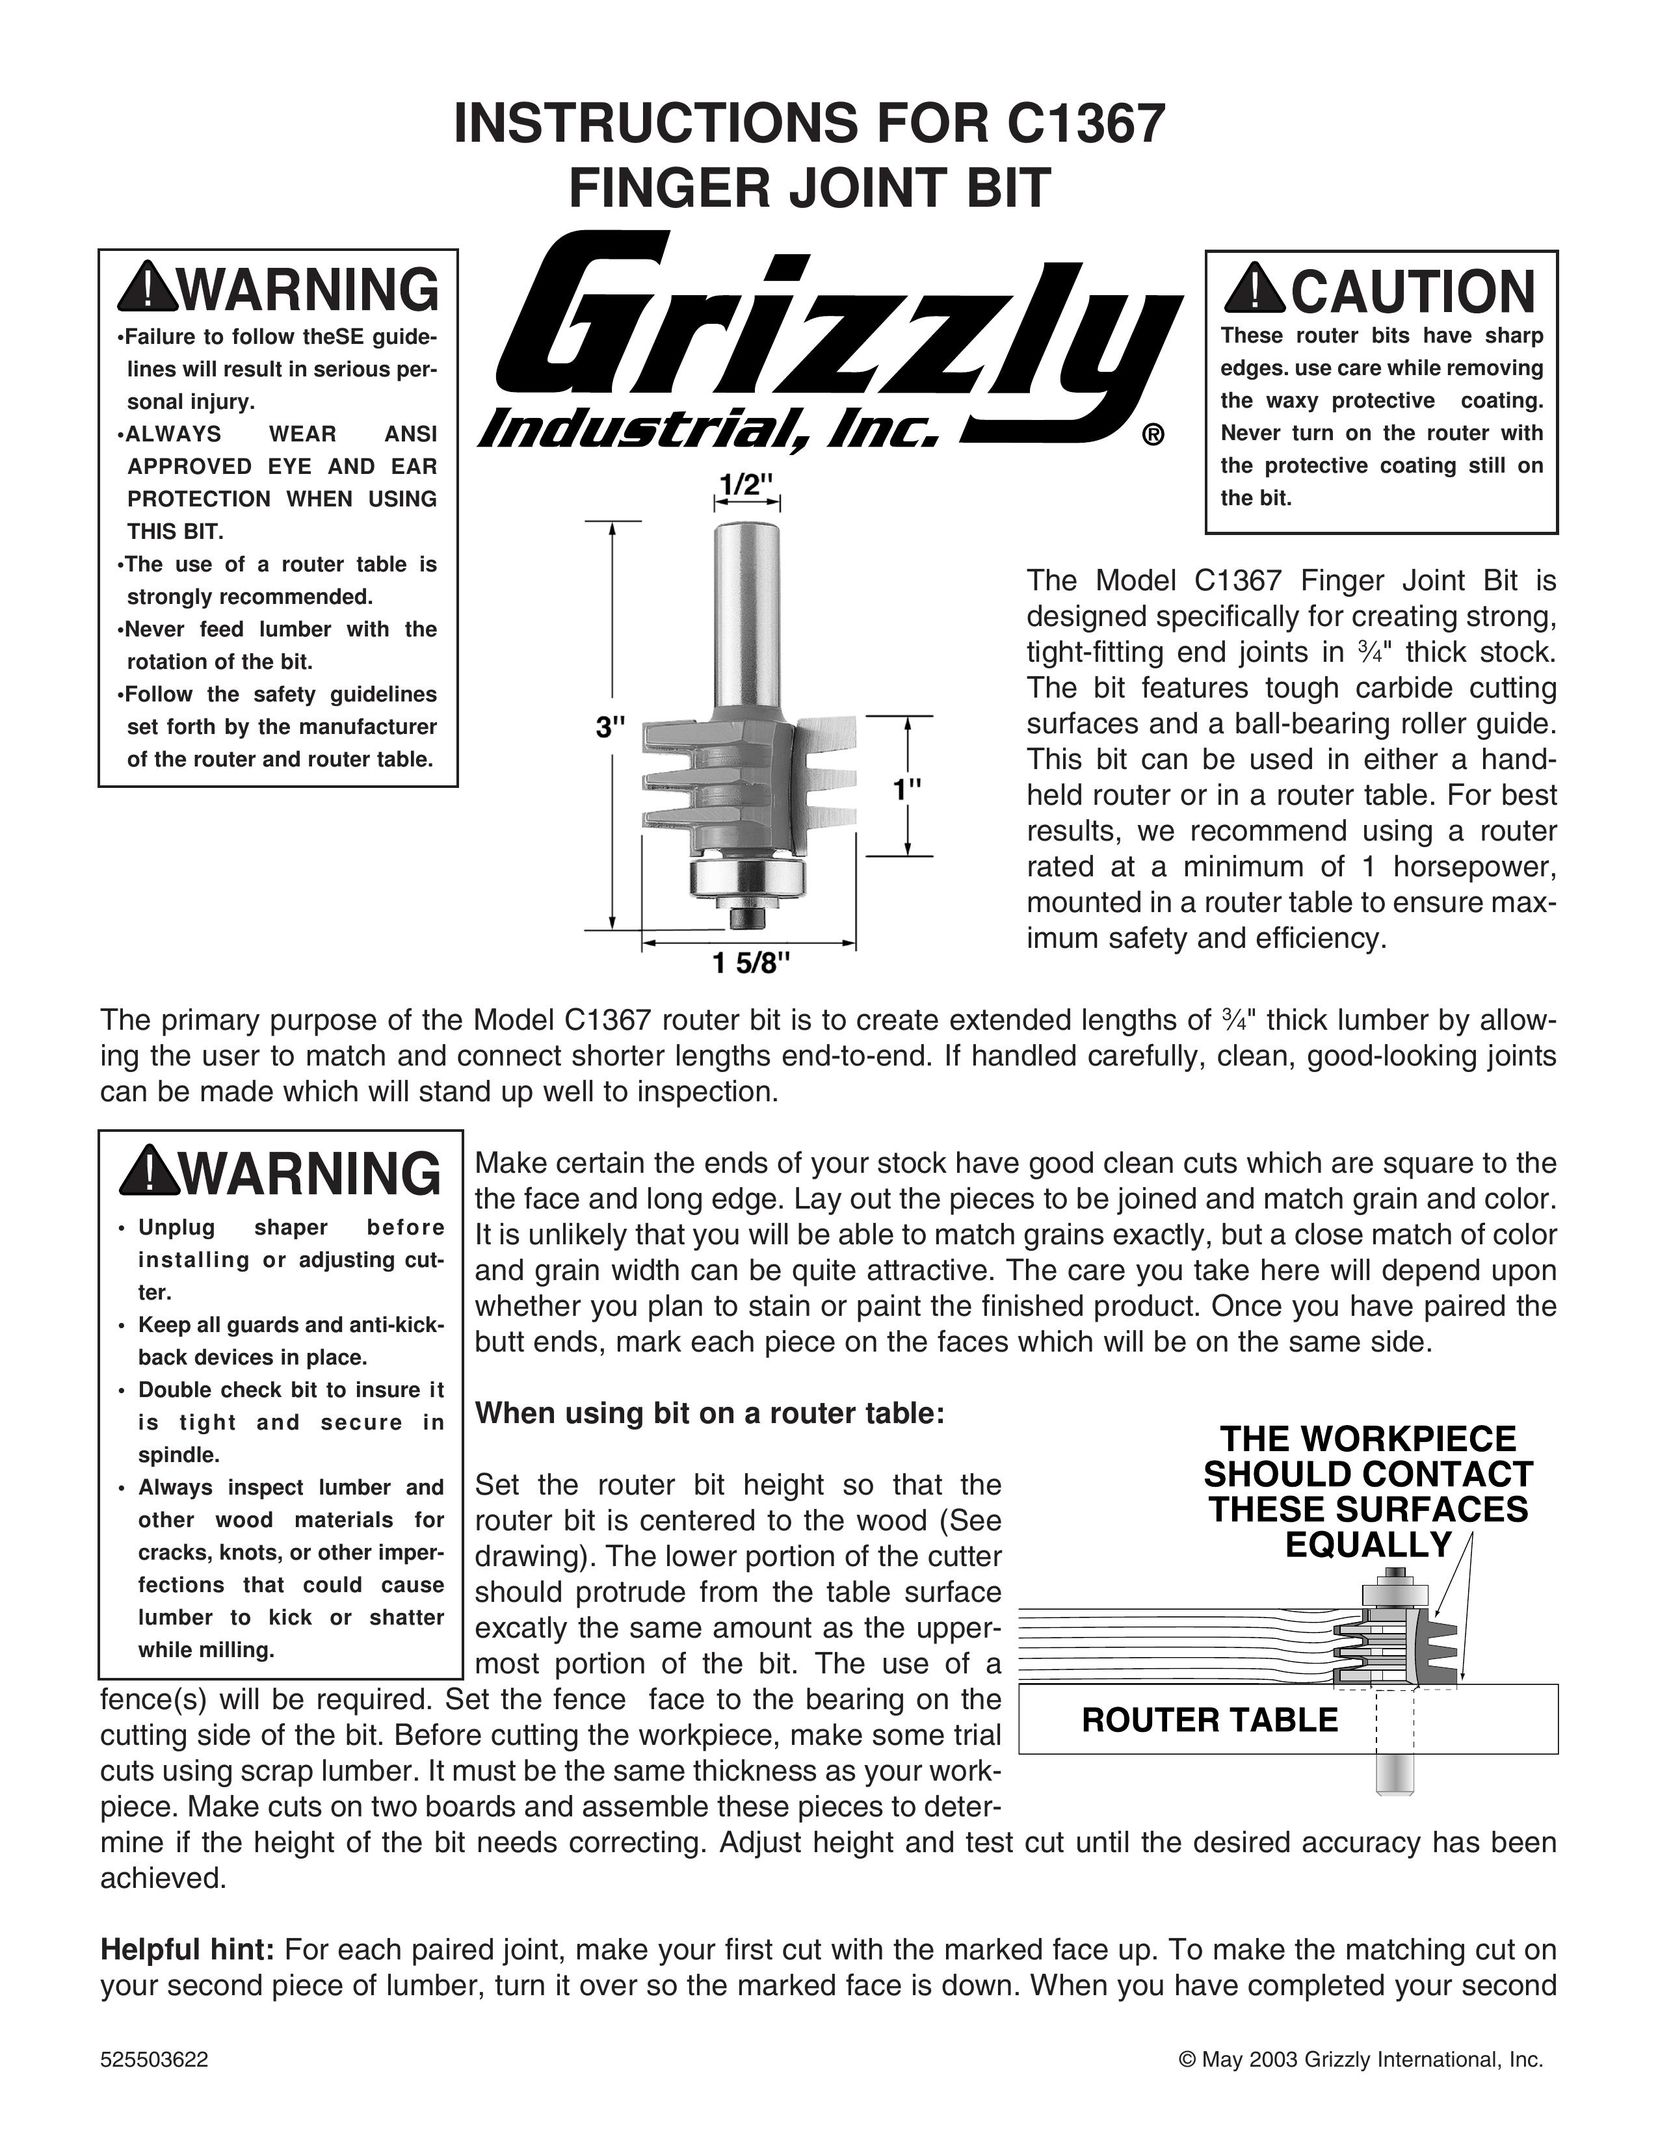 Grizzly C1367 Network Router User Manual